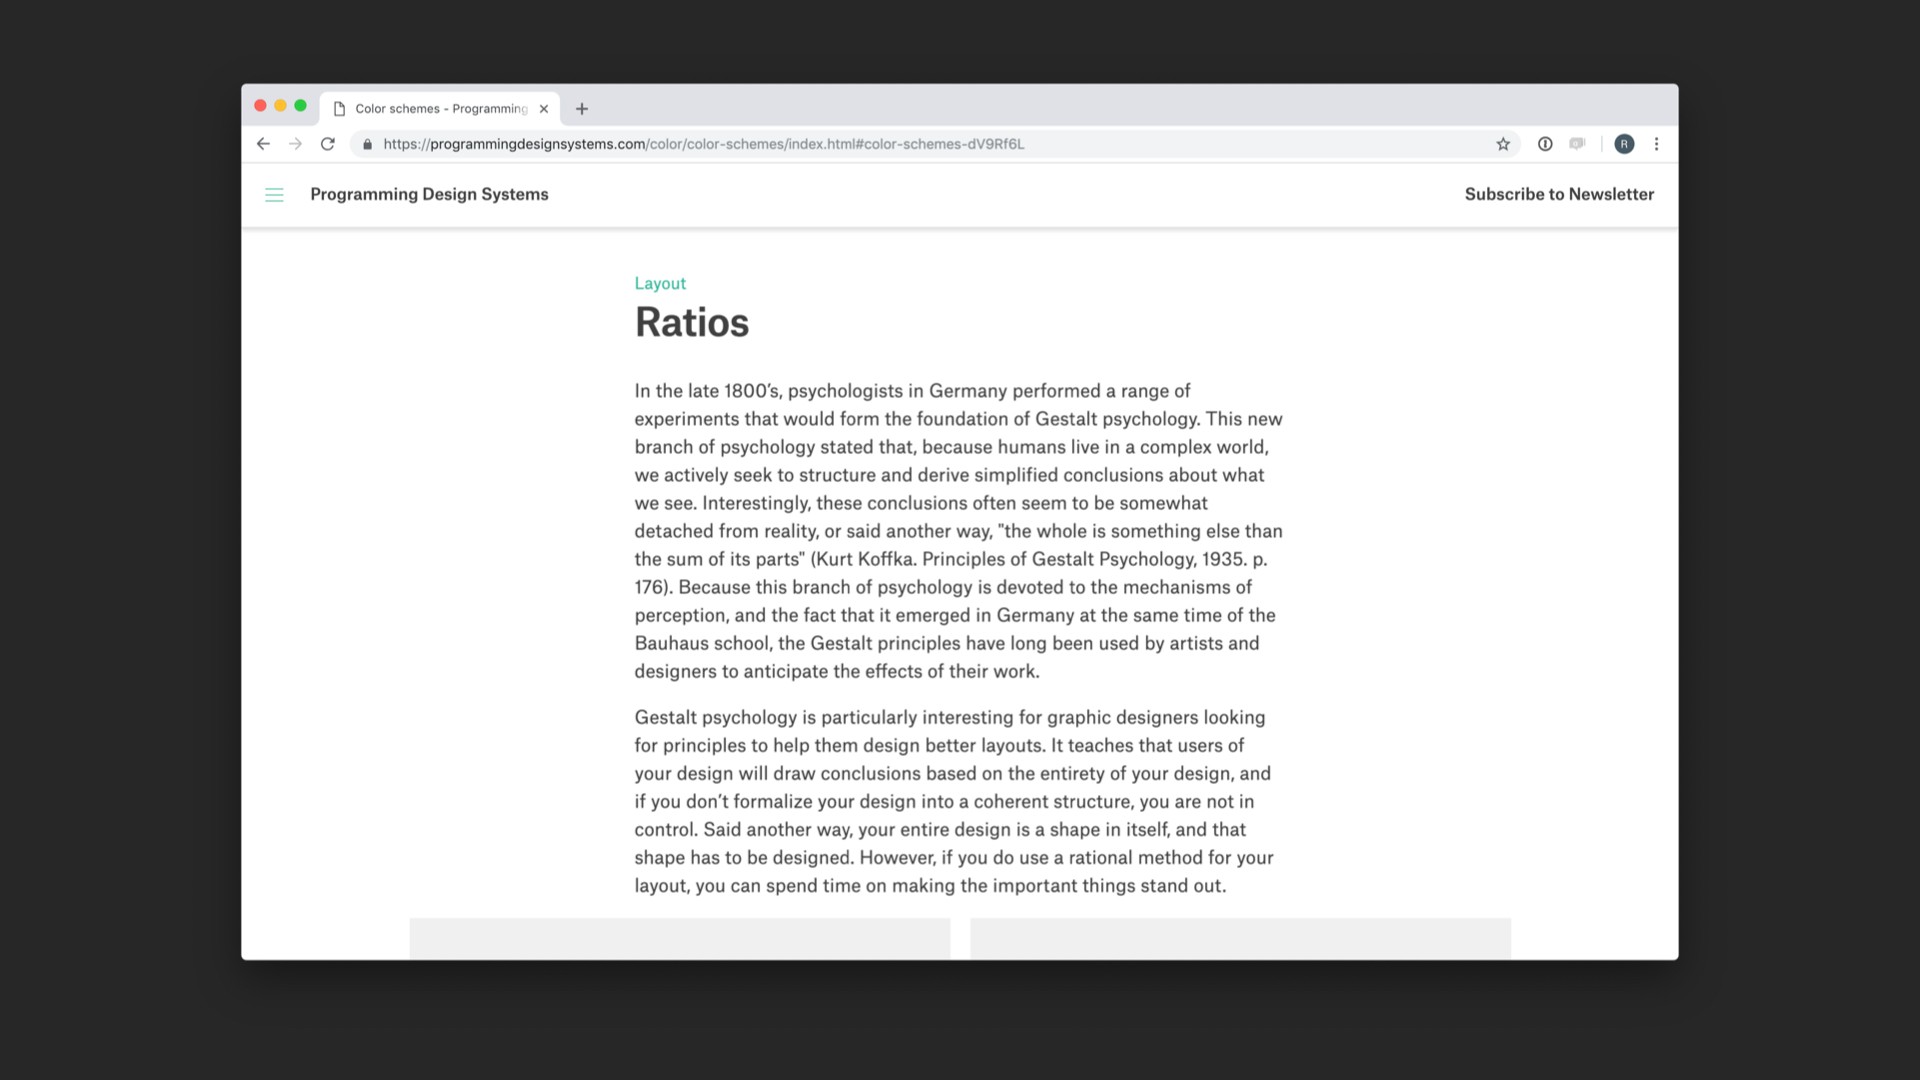 Screenshot of 'Ratios' chapter of referenced website.